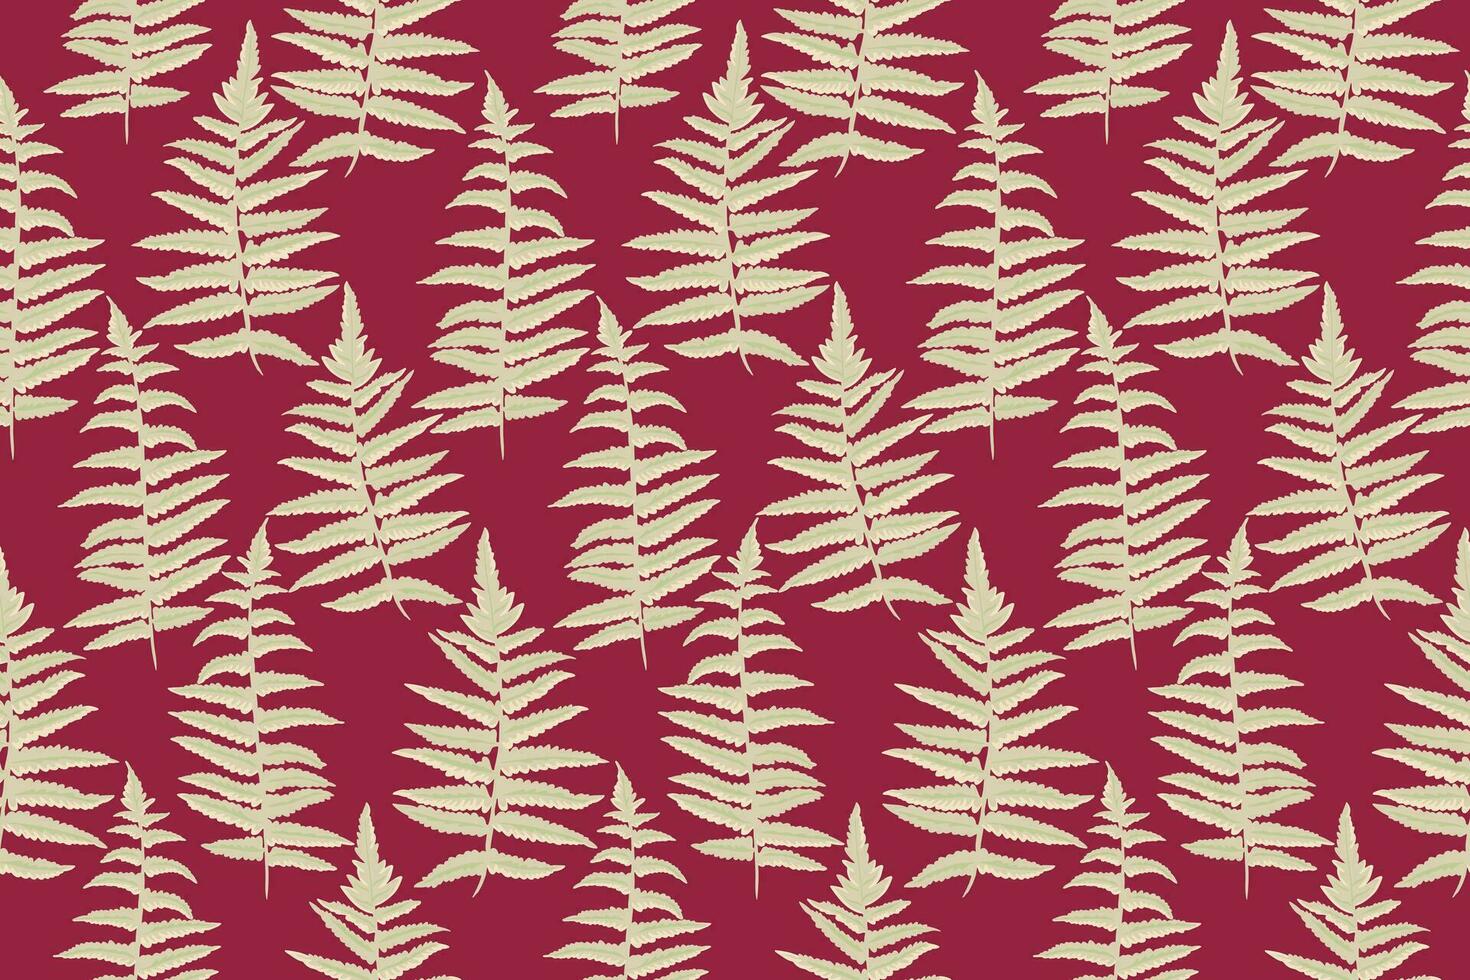 Seamless art shape leaves fern pattern. Vector hand drawn. Abstract stylized silhouettes leaf stems print on a burgundy background. Design for fashion, fabric, wallpaper